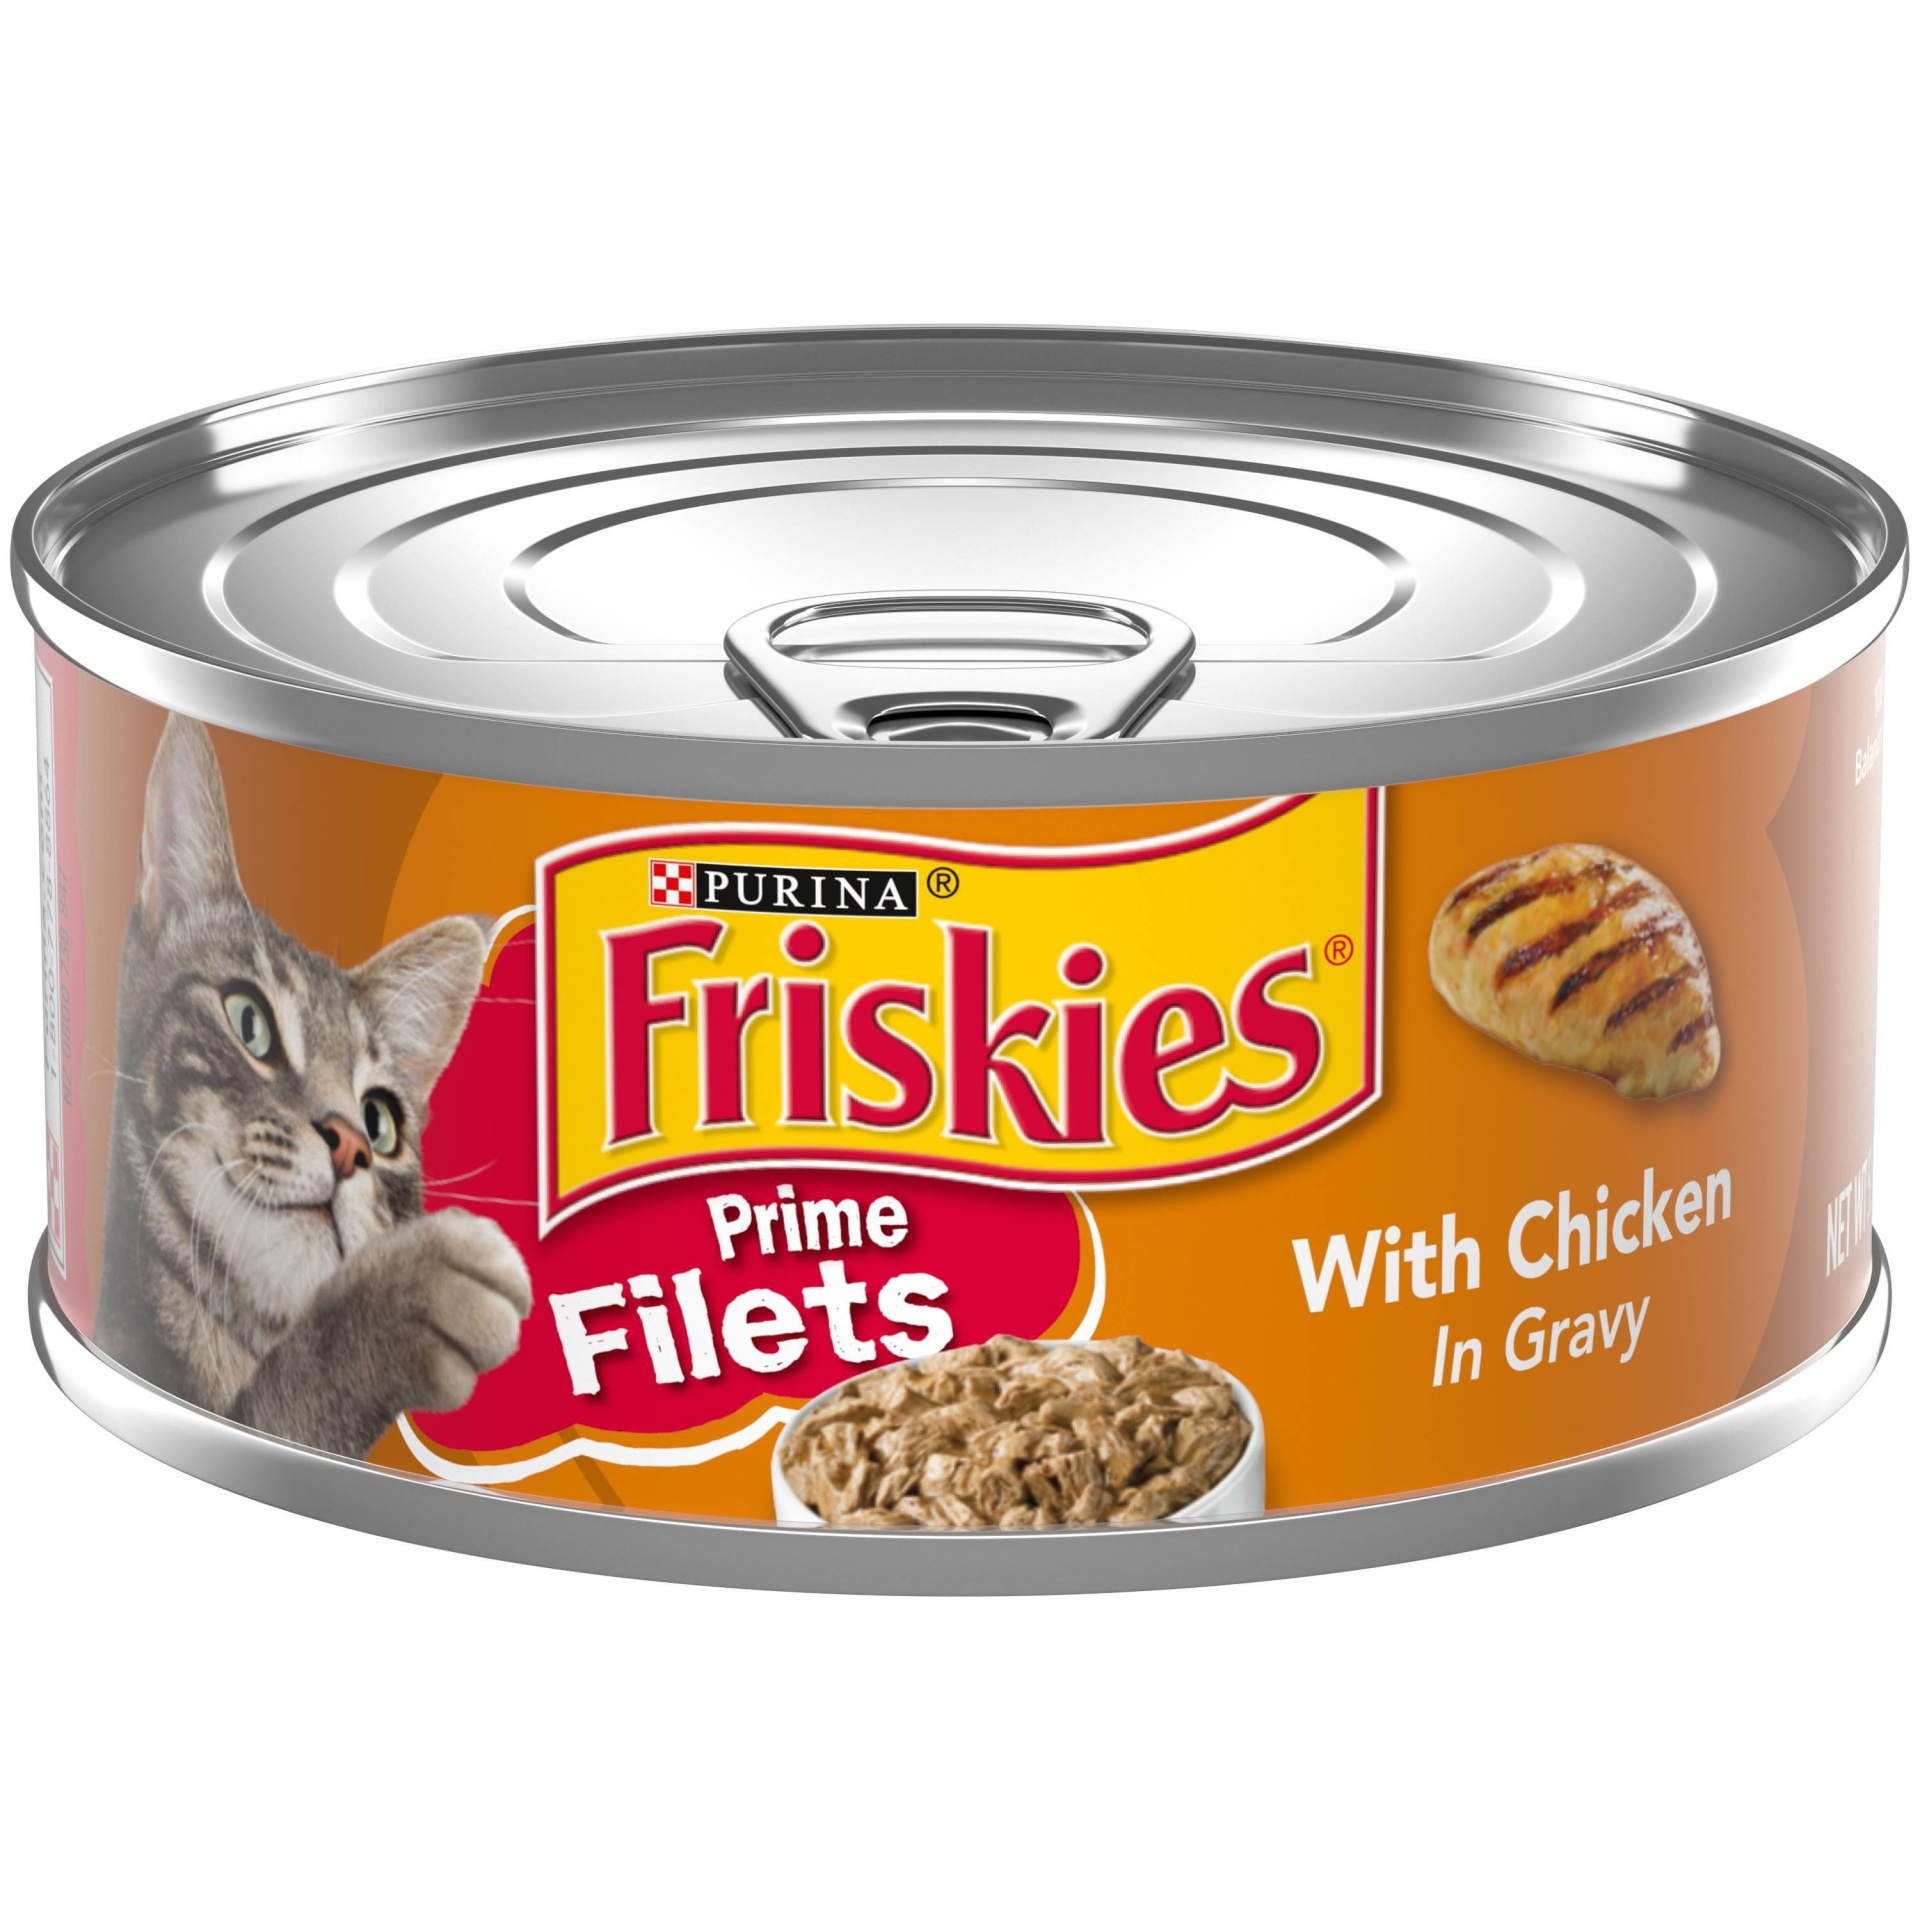 slide 1 of 7, Purina Friskies Prime Filets with Chicken in Gravy Cat Food, 5.5 oz